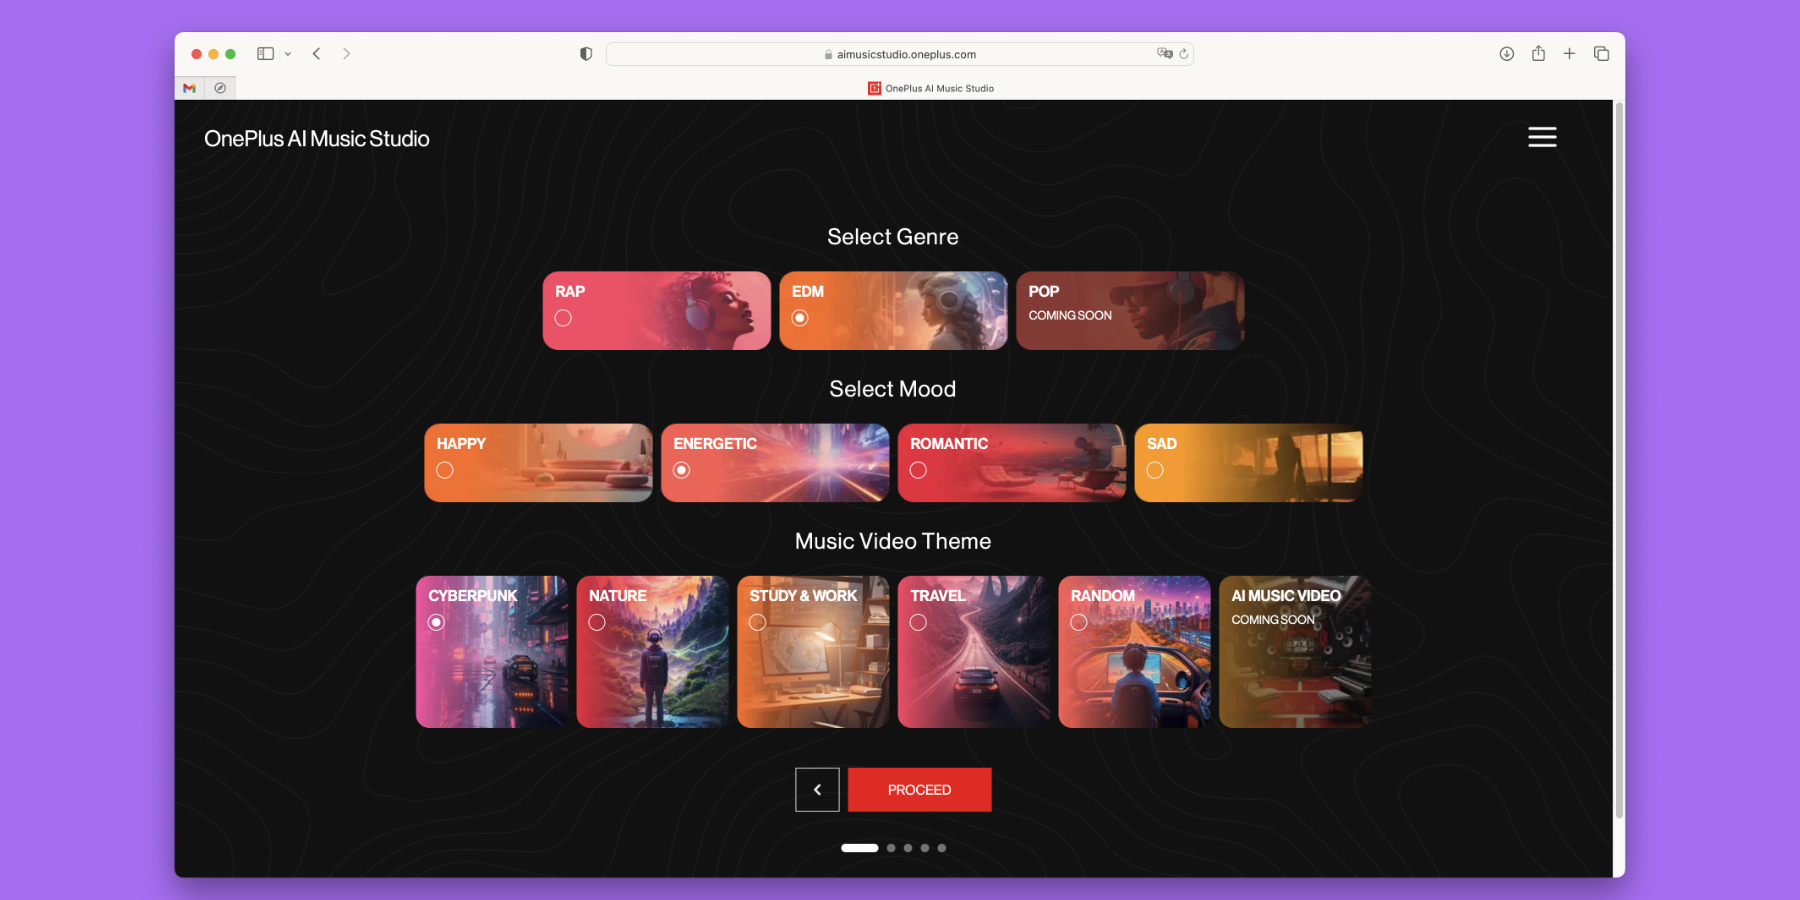 OnePlus has launched a free neural network that creates music and music videos